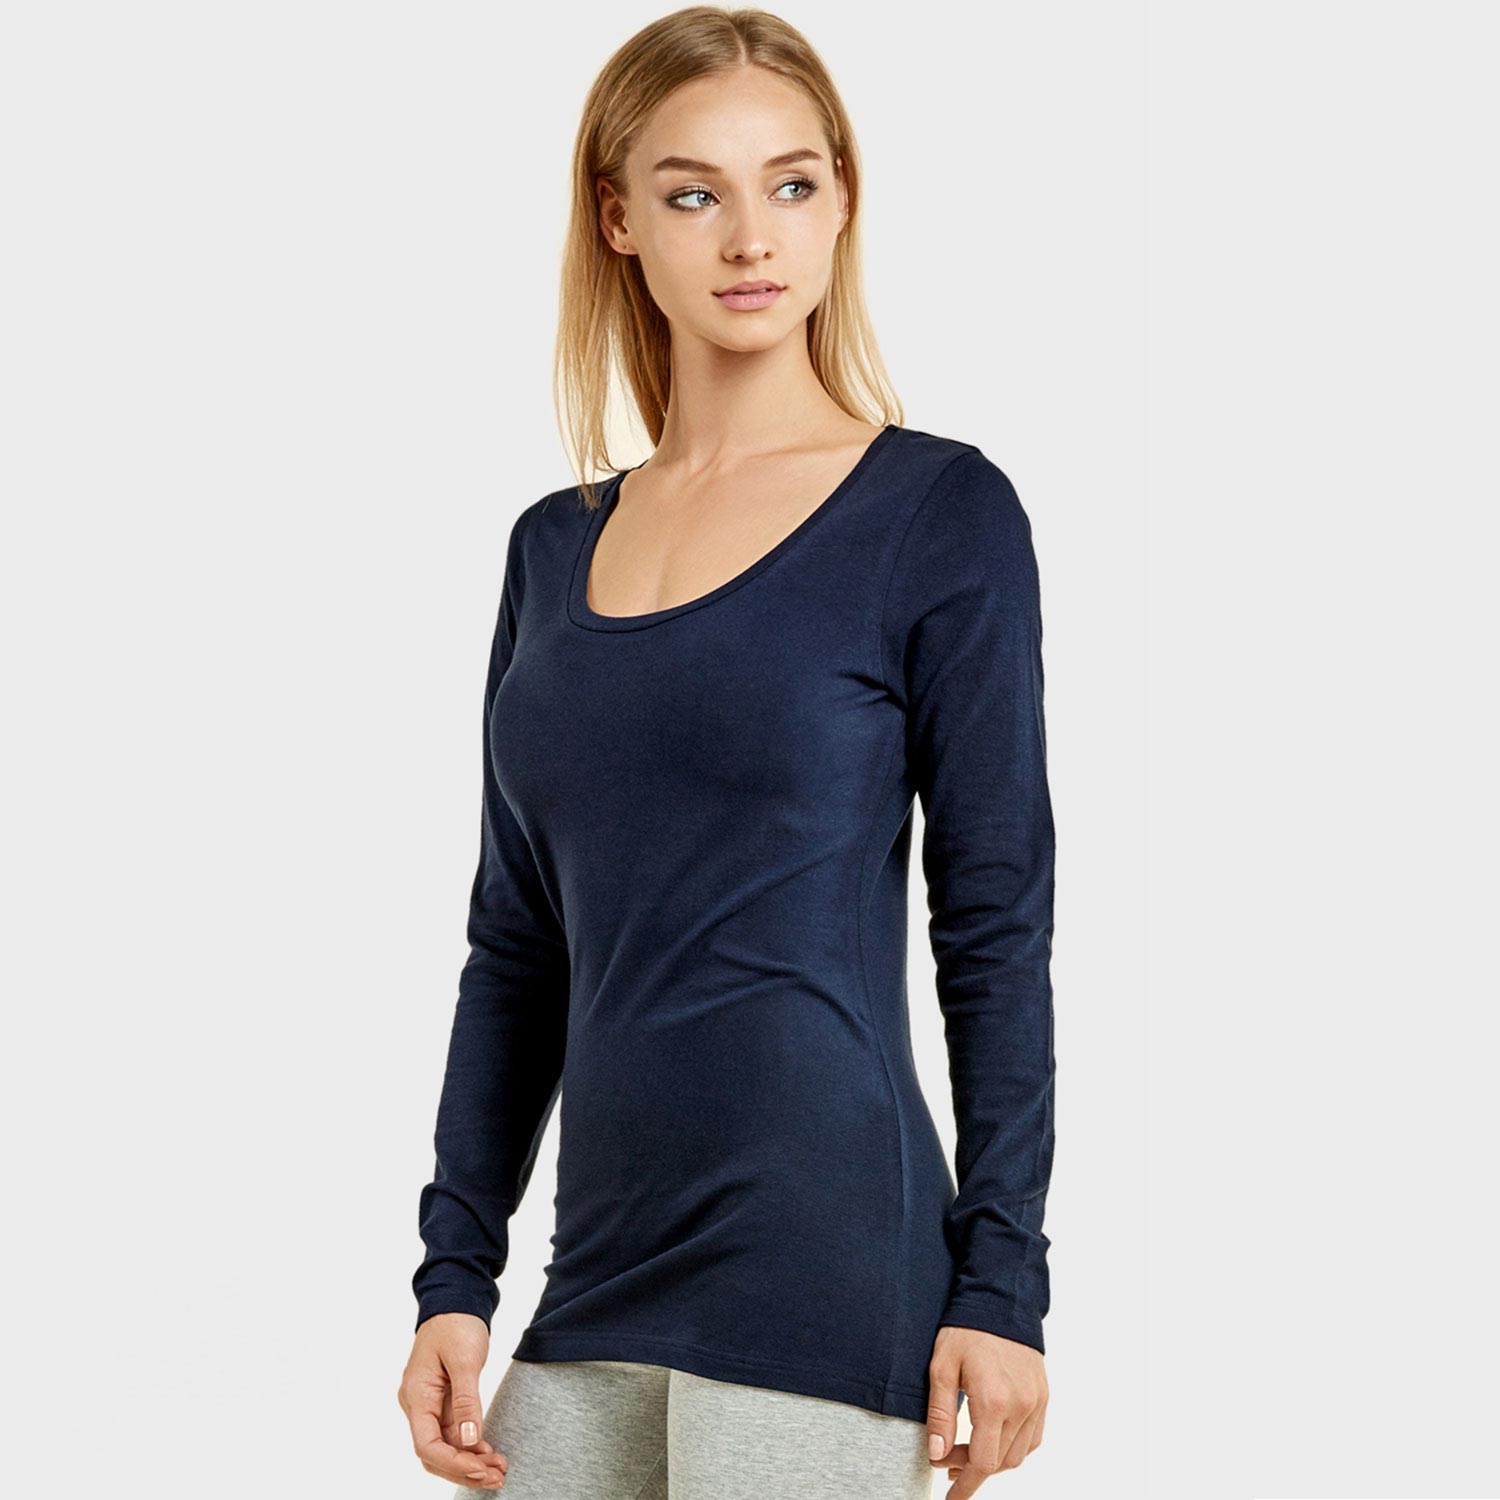 6 Pack Ladies Long Sleeve Round Neck T-Shirt